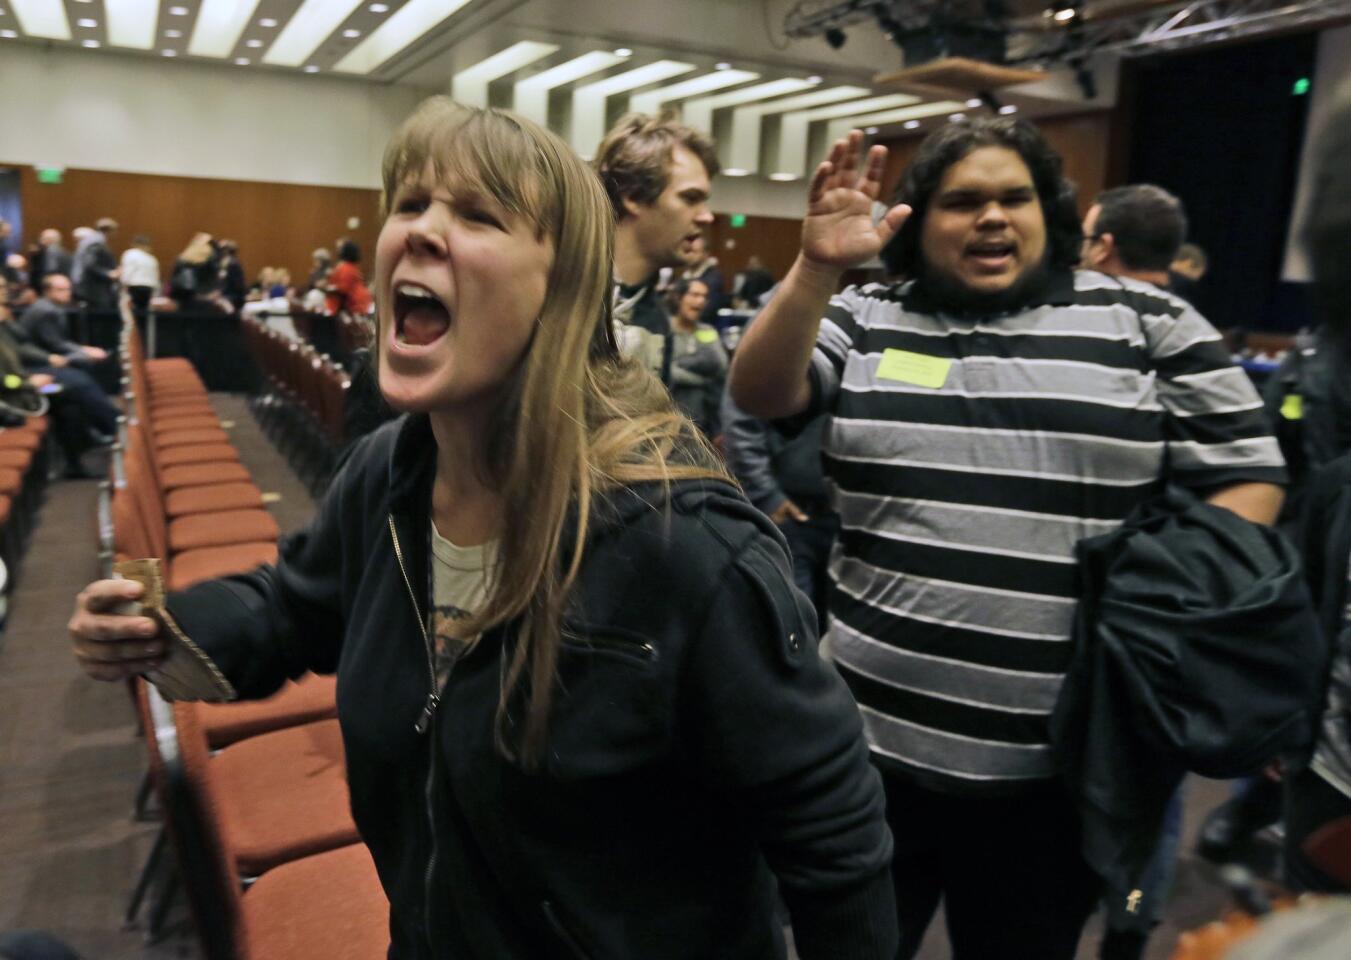 Amelia Itayre, 23, and Sebastian Cano, 21, students at UC Davis, react after the vote to raise tuition fees was announced during the UC regents meeting in San Francisco on Thursday.